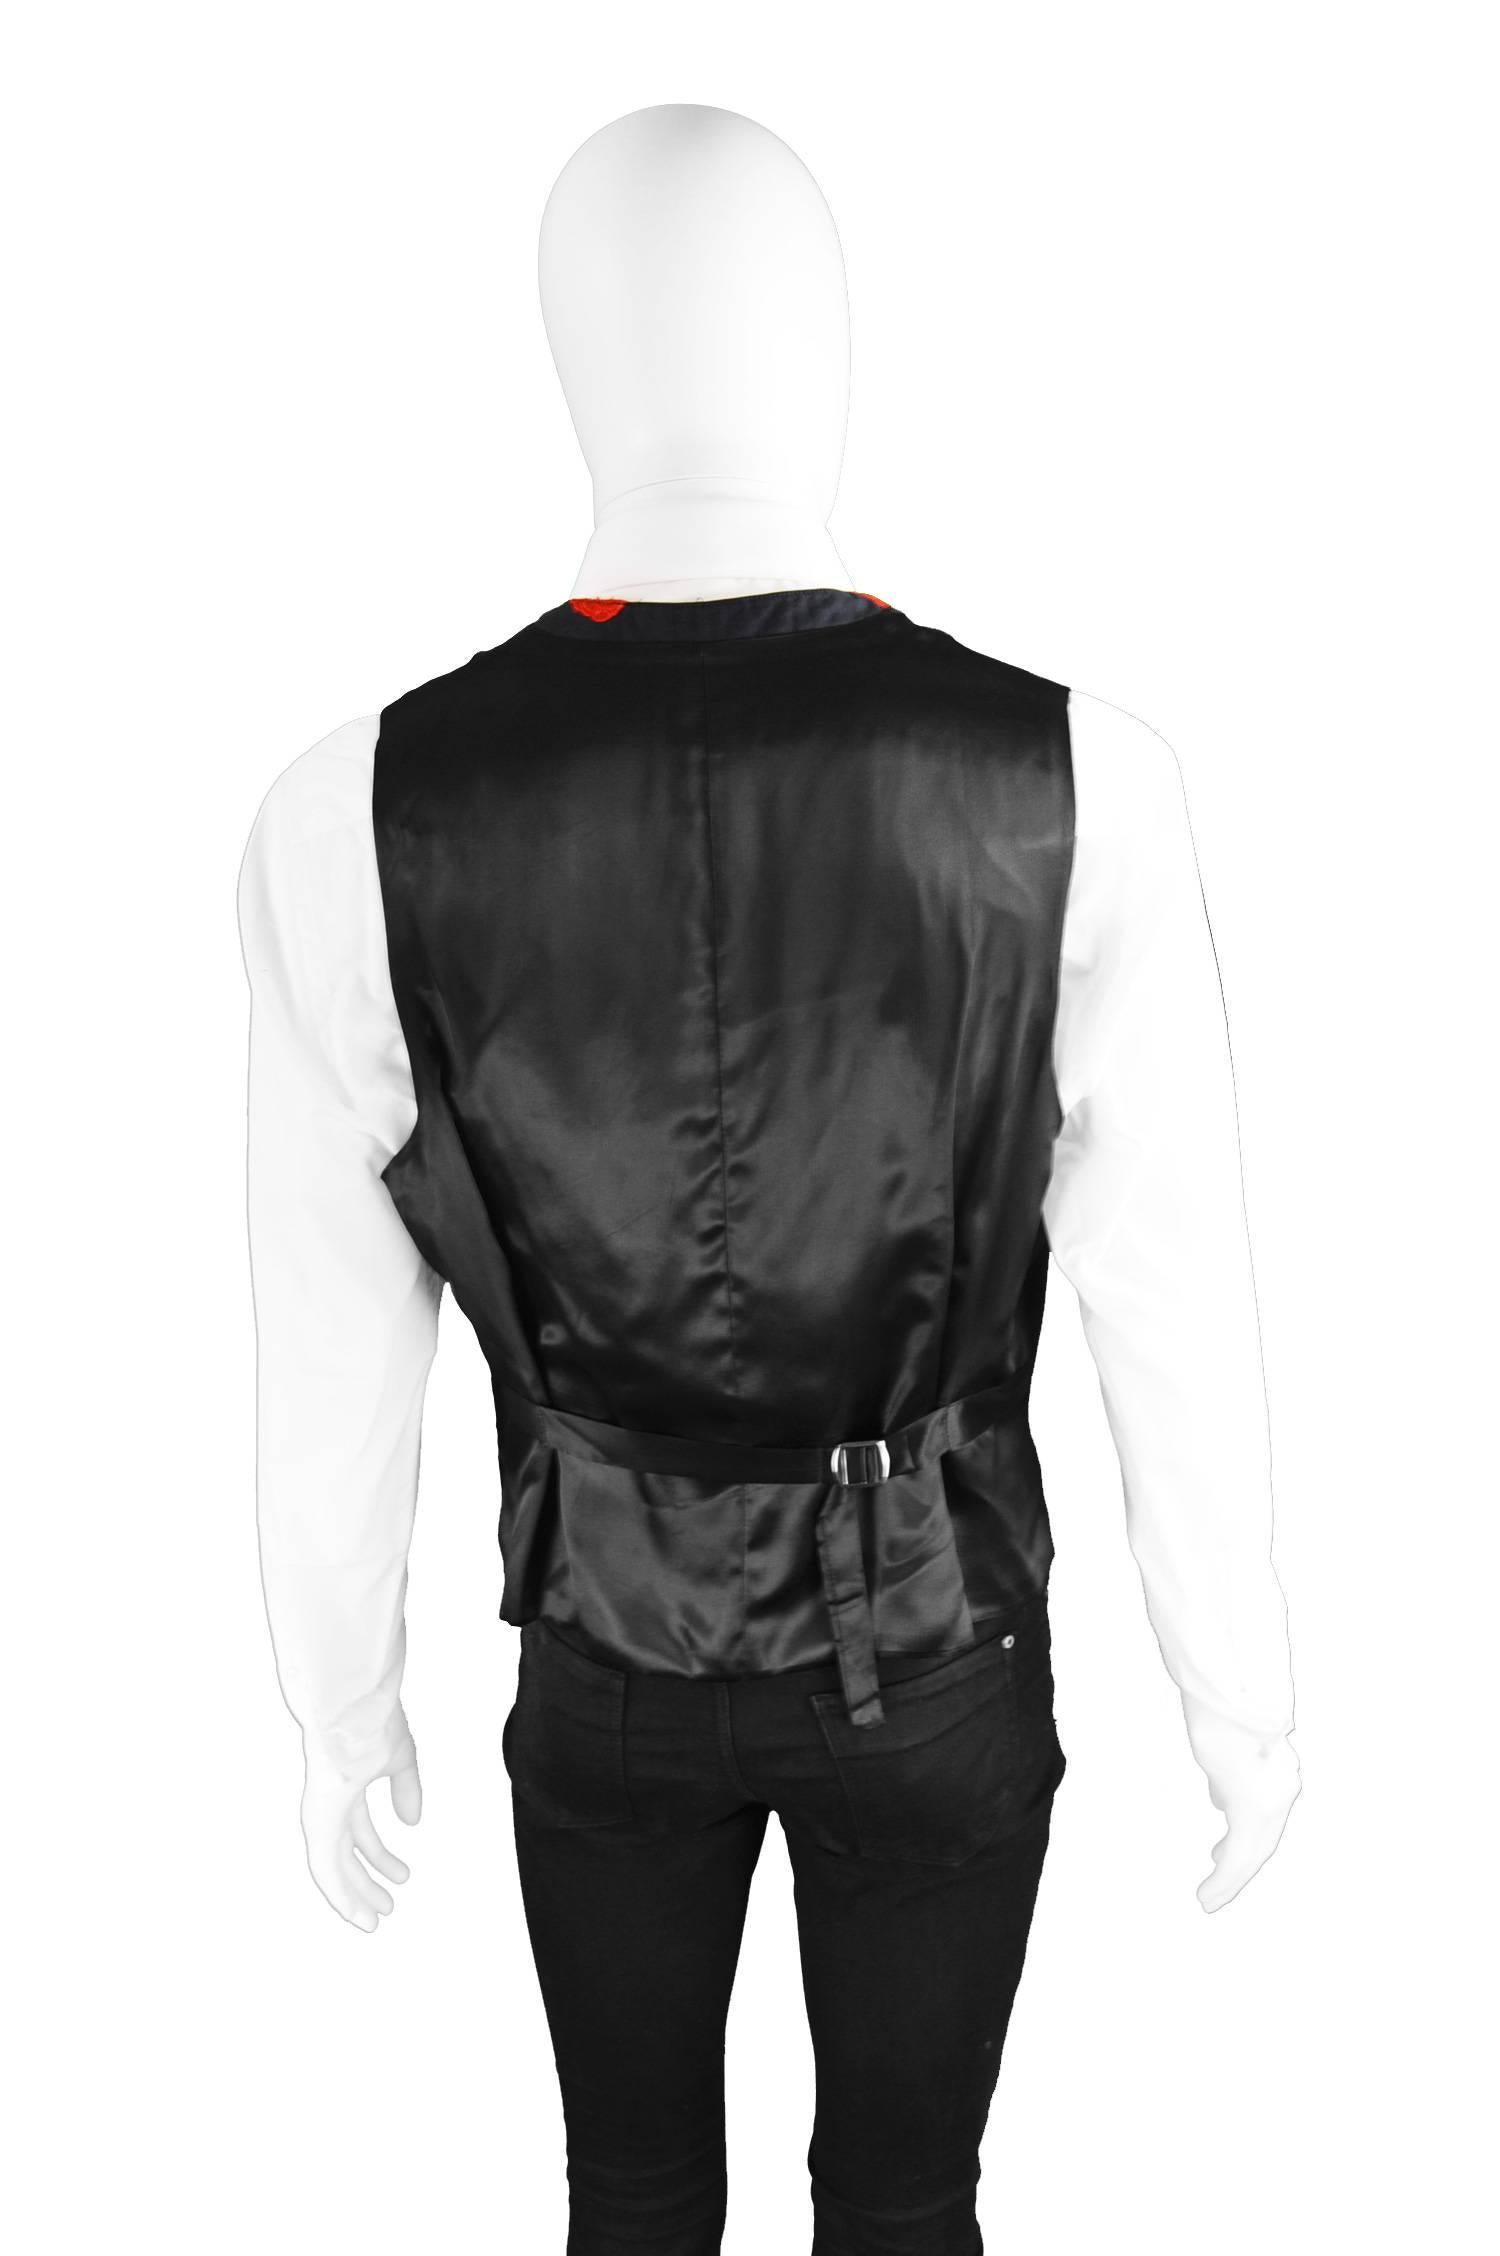 Paul Smith Men's Vintage Black & Red Embroidered Waistcoat, 1990s 2